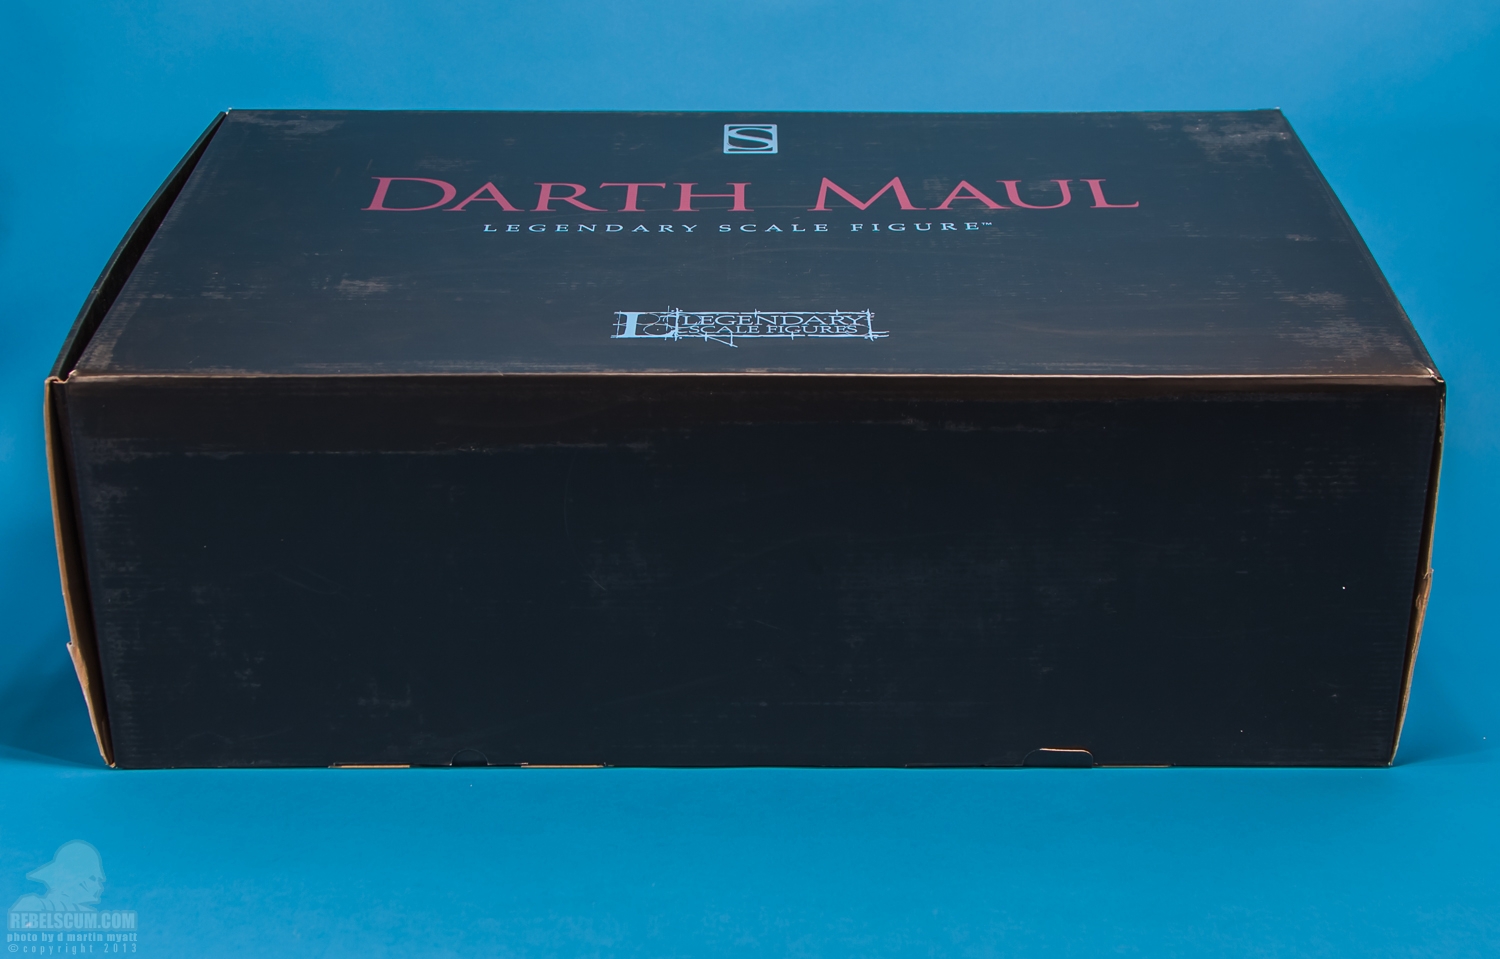 Darth_Maul_Legendary_Scale_Figure_Sideshow_Collectibles-53.jpg